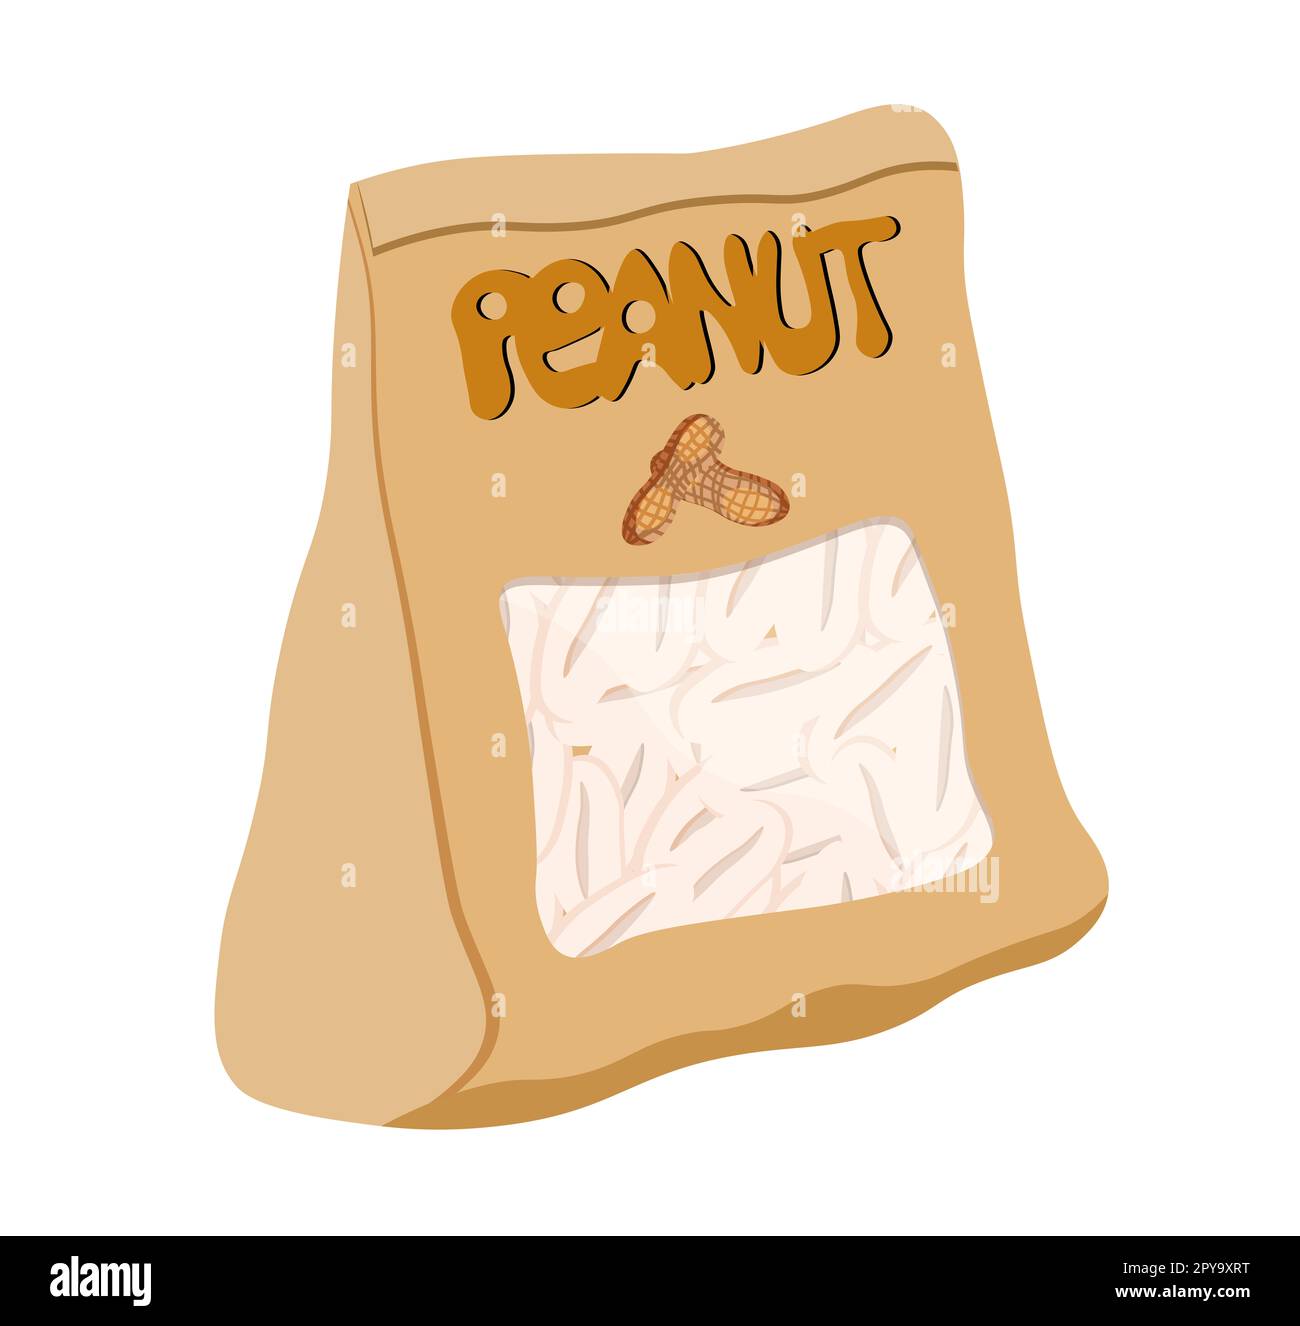 Peanut. Peanut beans in a package. bag of nuts.vector illustration isolated on white background Stock Photo